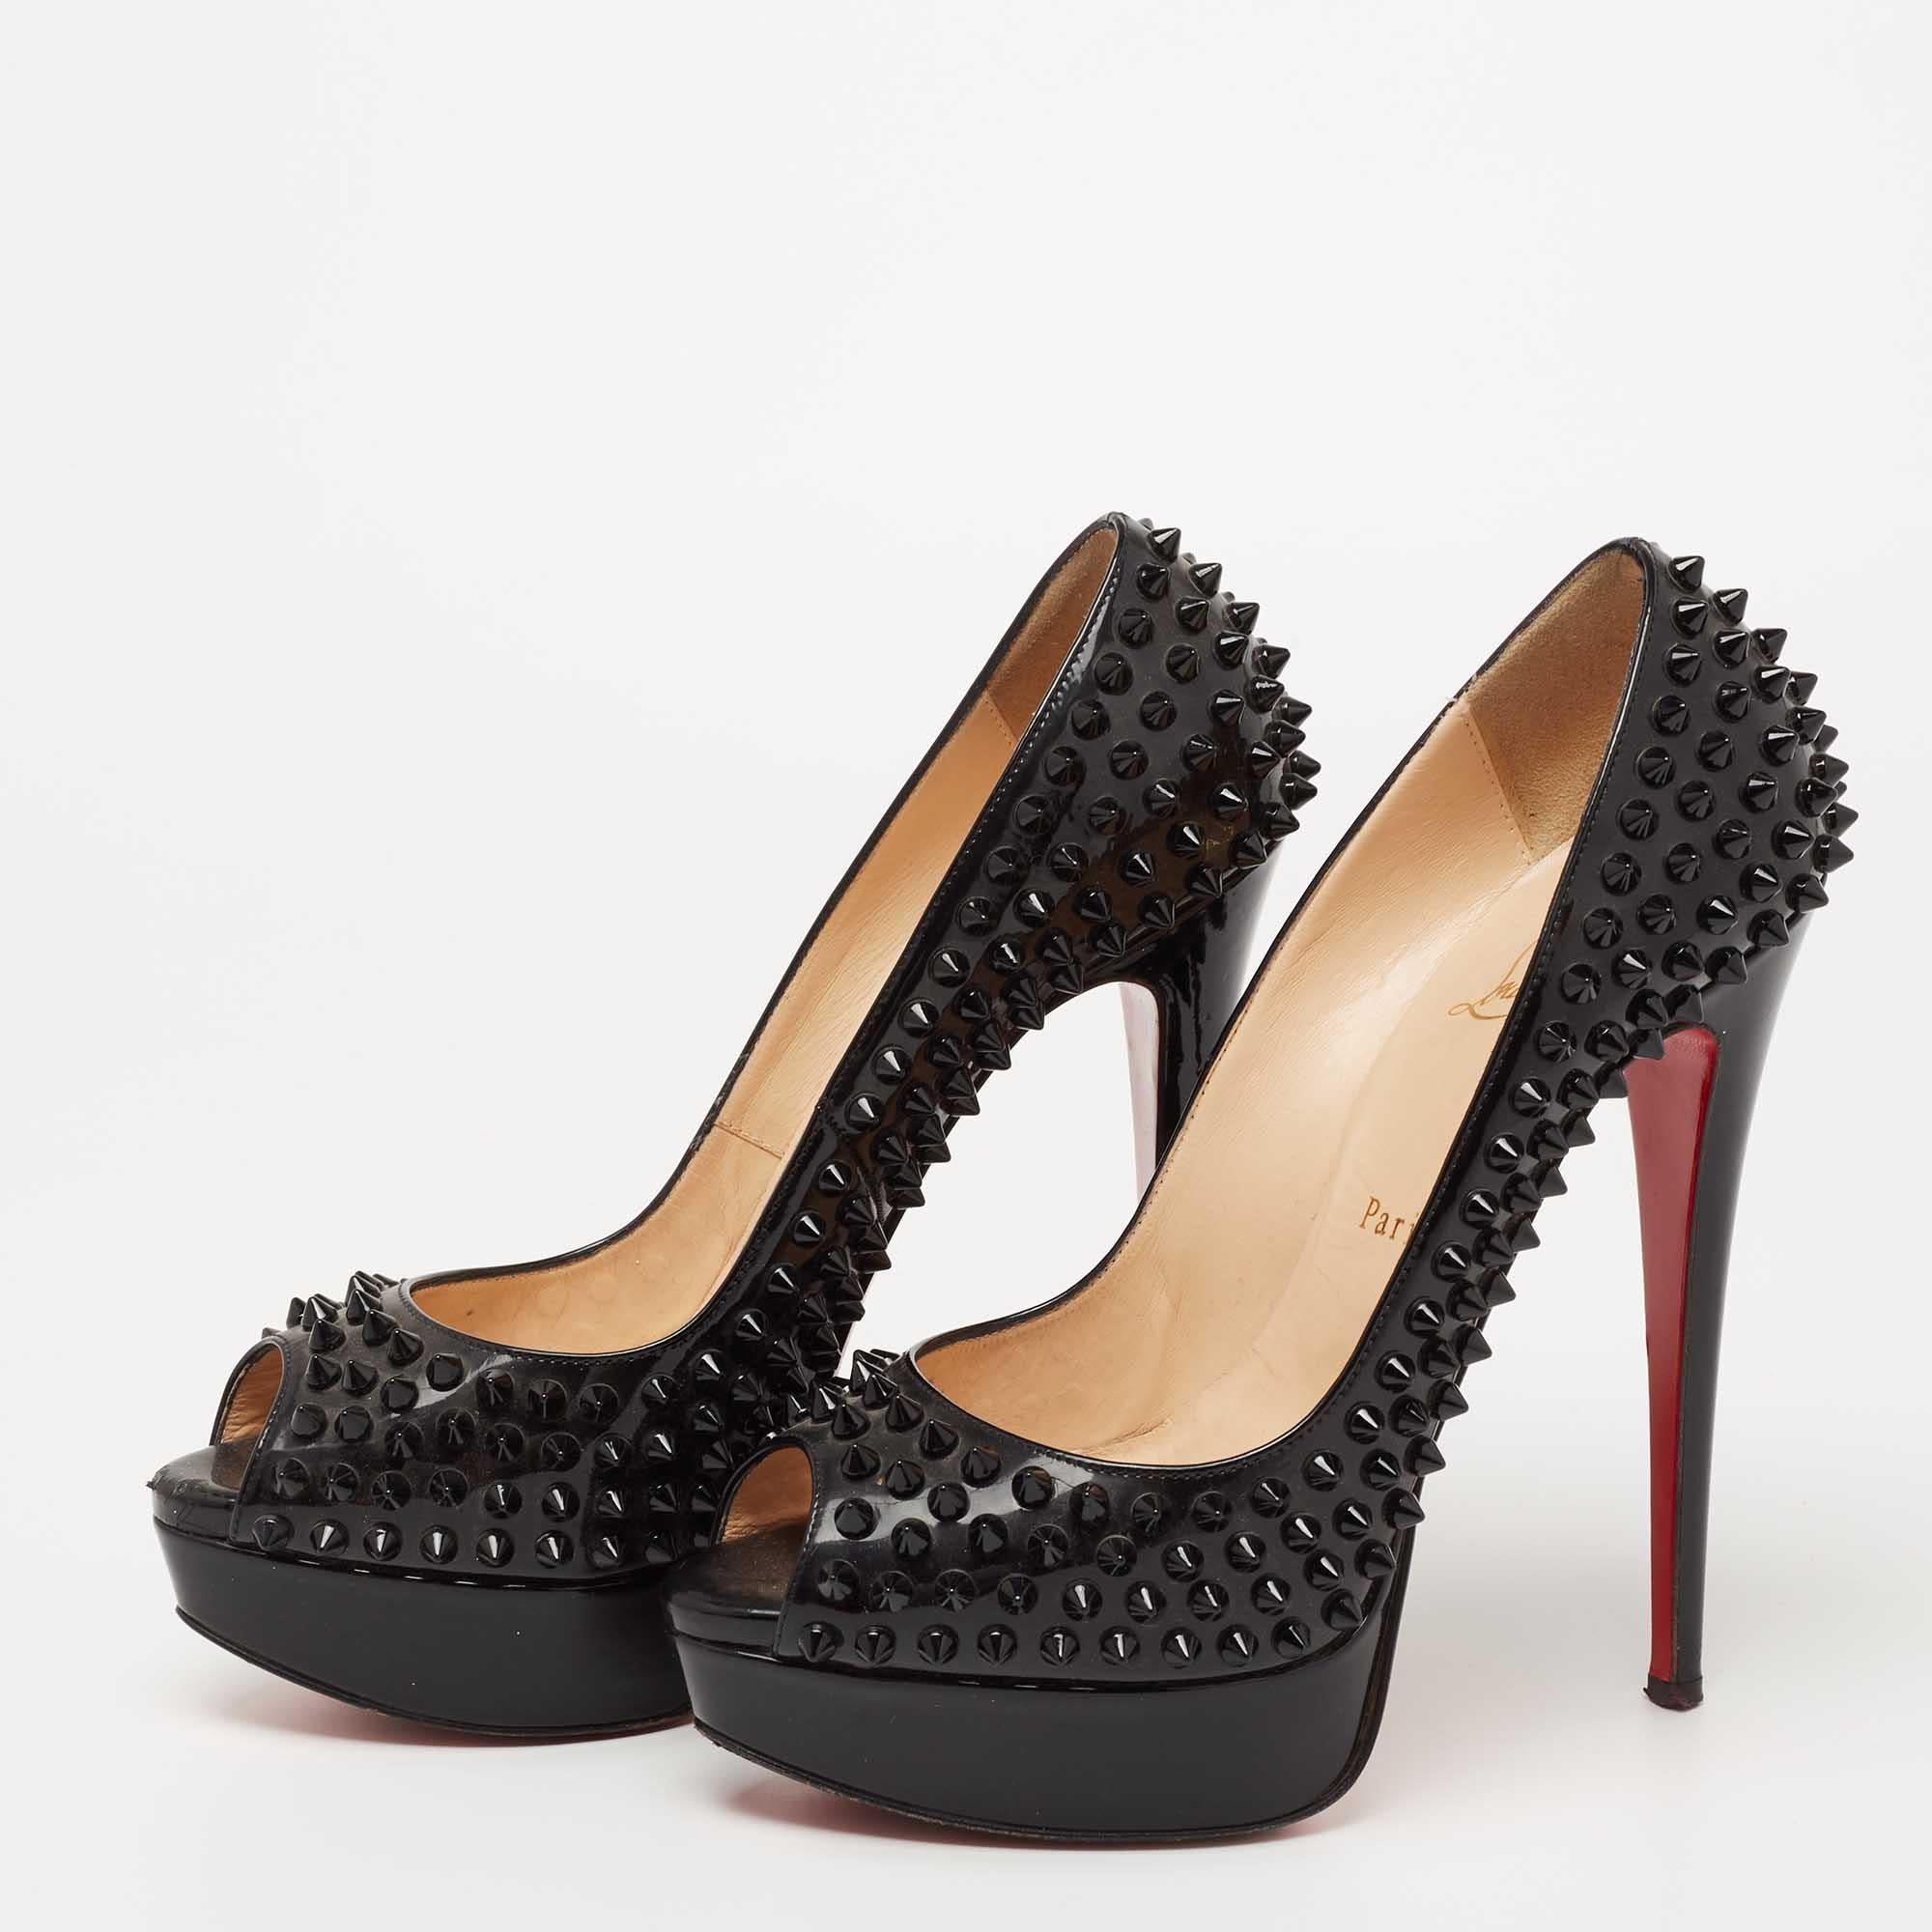 Stand out from the crowd with this gorgeous pair of Louboutins that exude high fashion with class! Crafted from patent leather, this is a creation from their Lady Peep collection. They feature a classic black shade with peep toes and tonal spikes